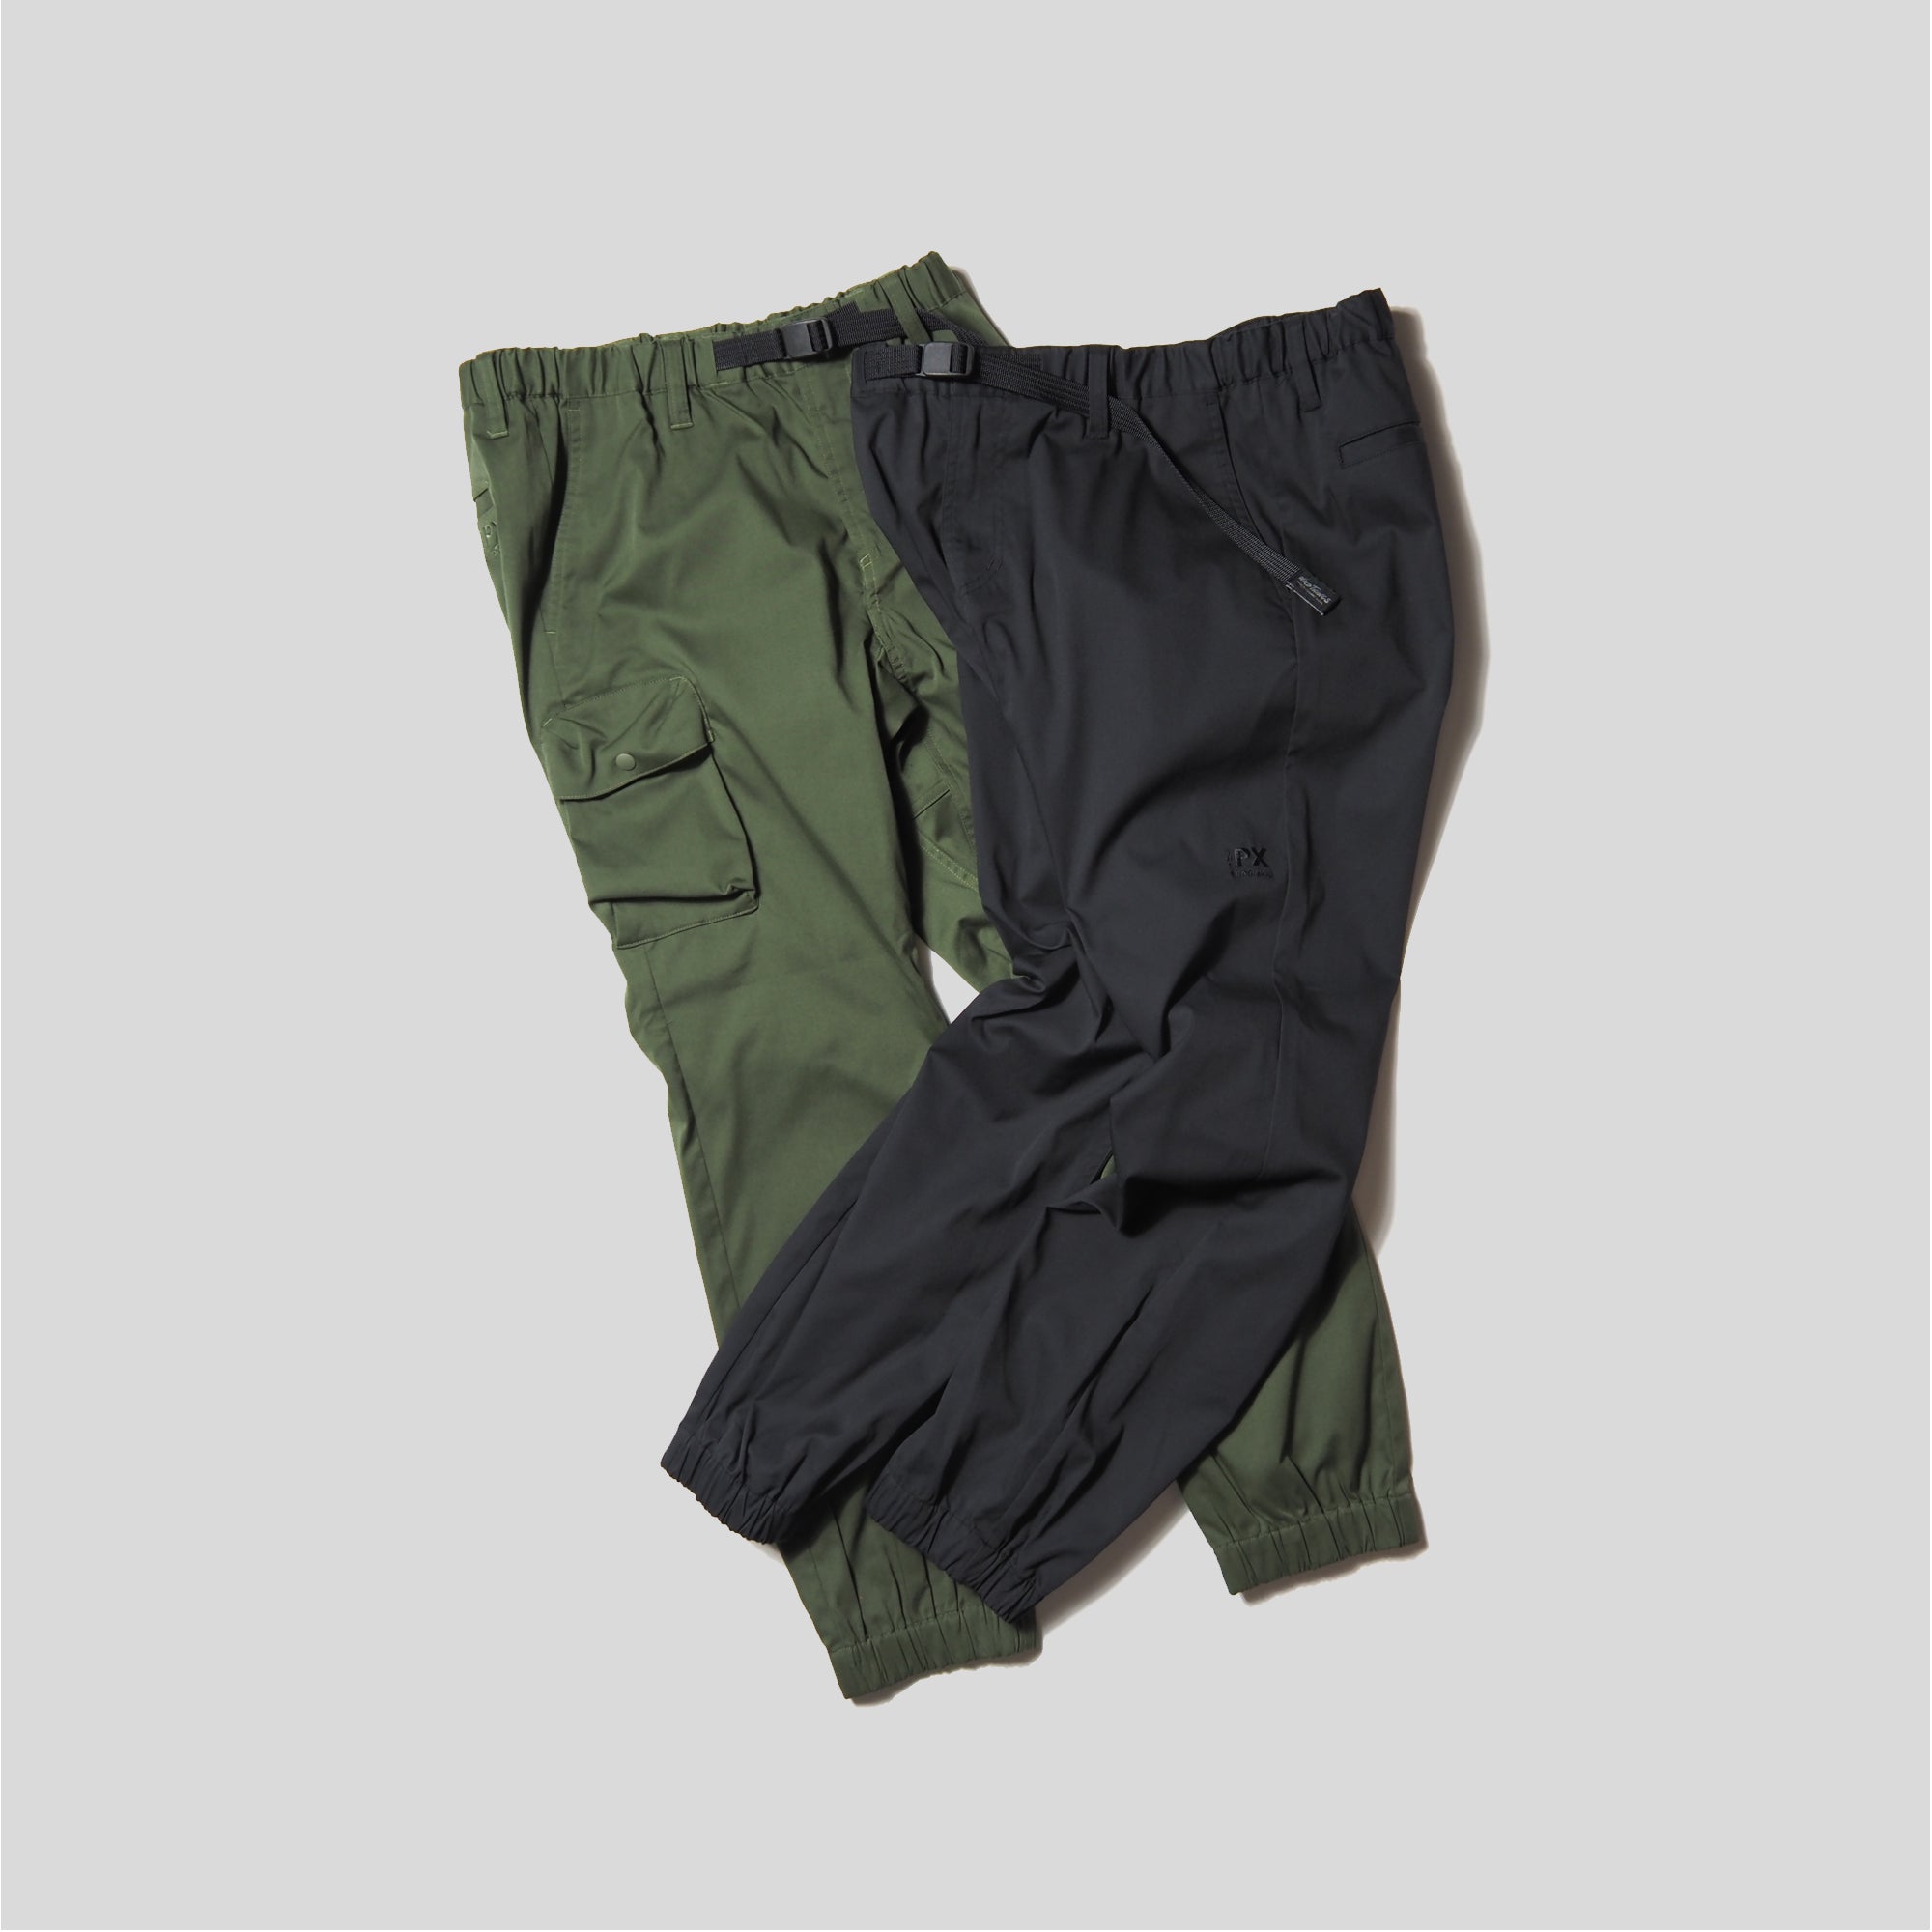 THE PX WILDTHINGS forGOLF / BELTED JOGGER PANTS [WPX230104]【島根